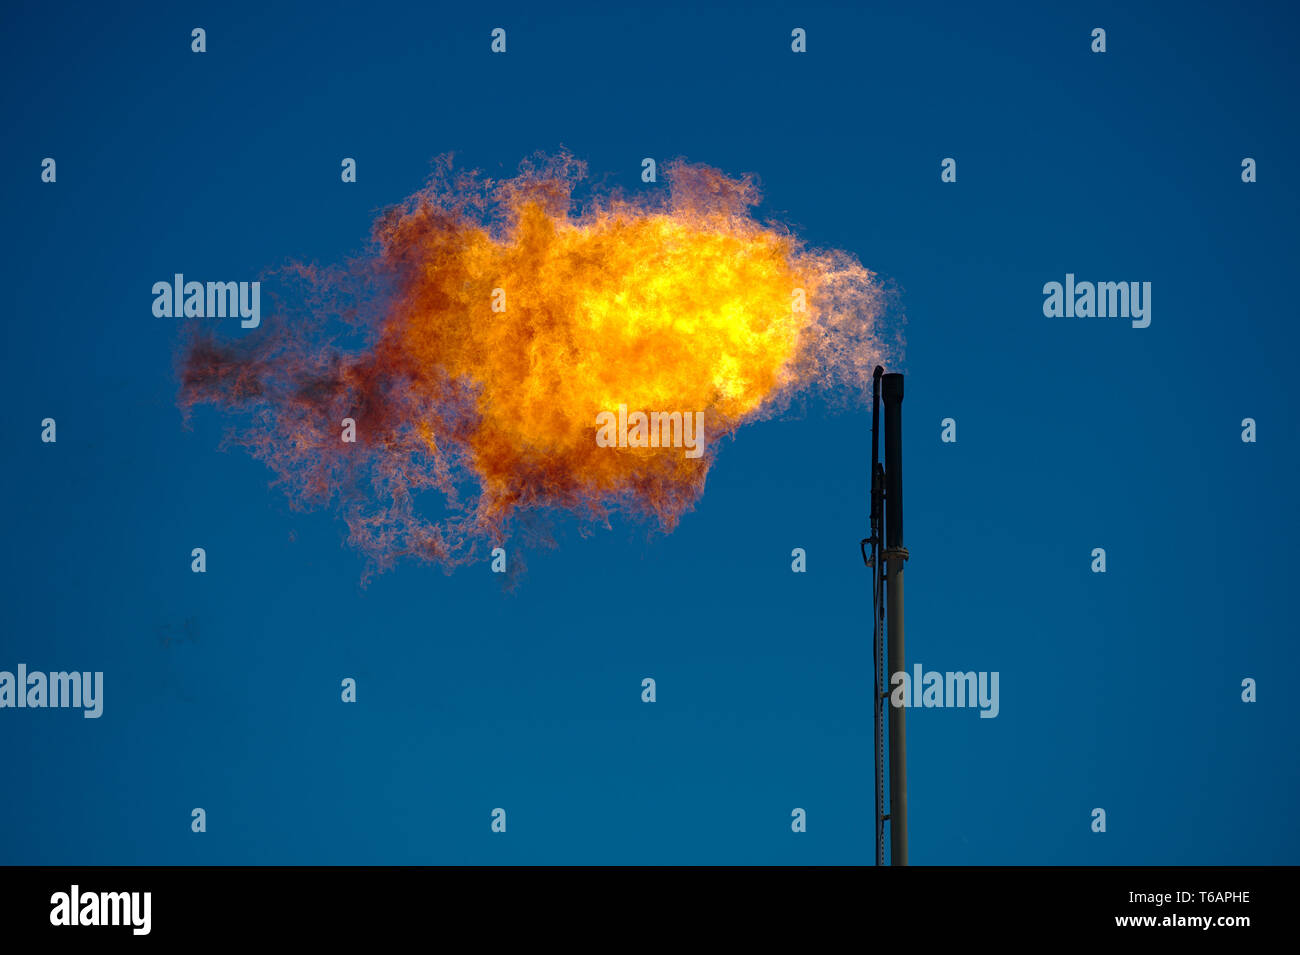 Midland, County / United States - April 21, 2019: Excess natural gas is burned off at an oil well site. Stock Photo